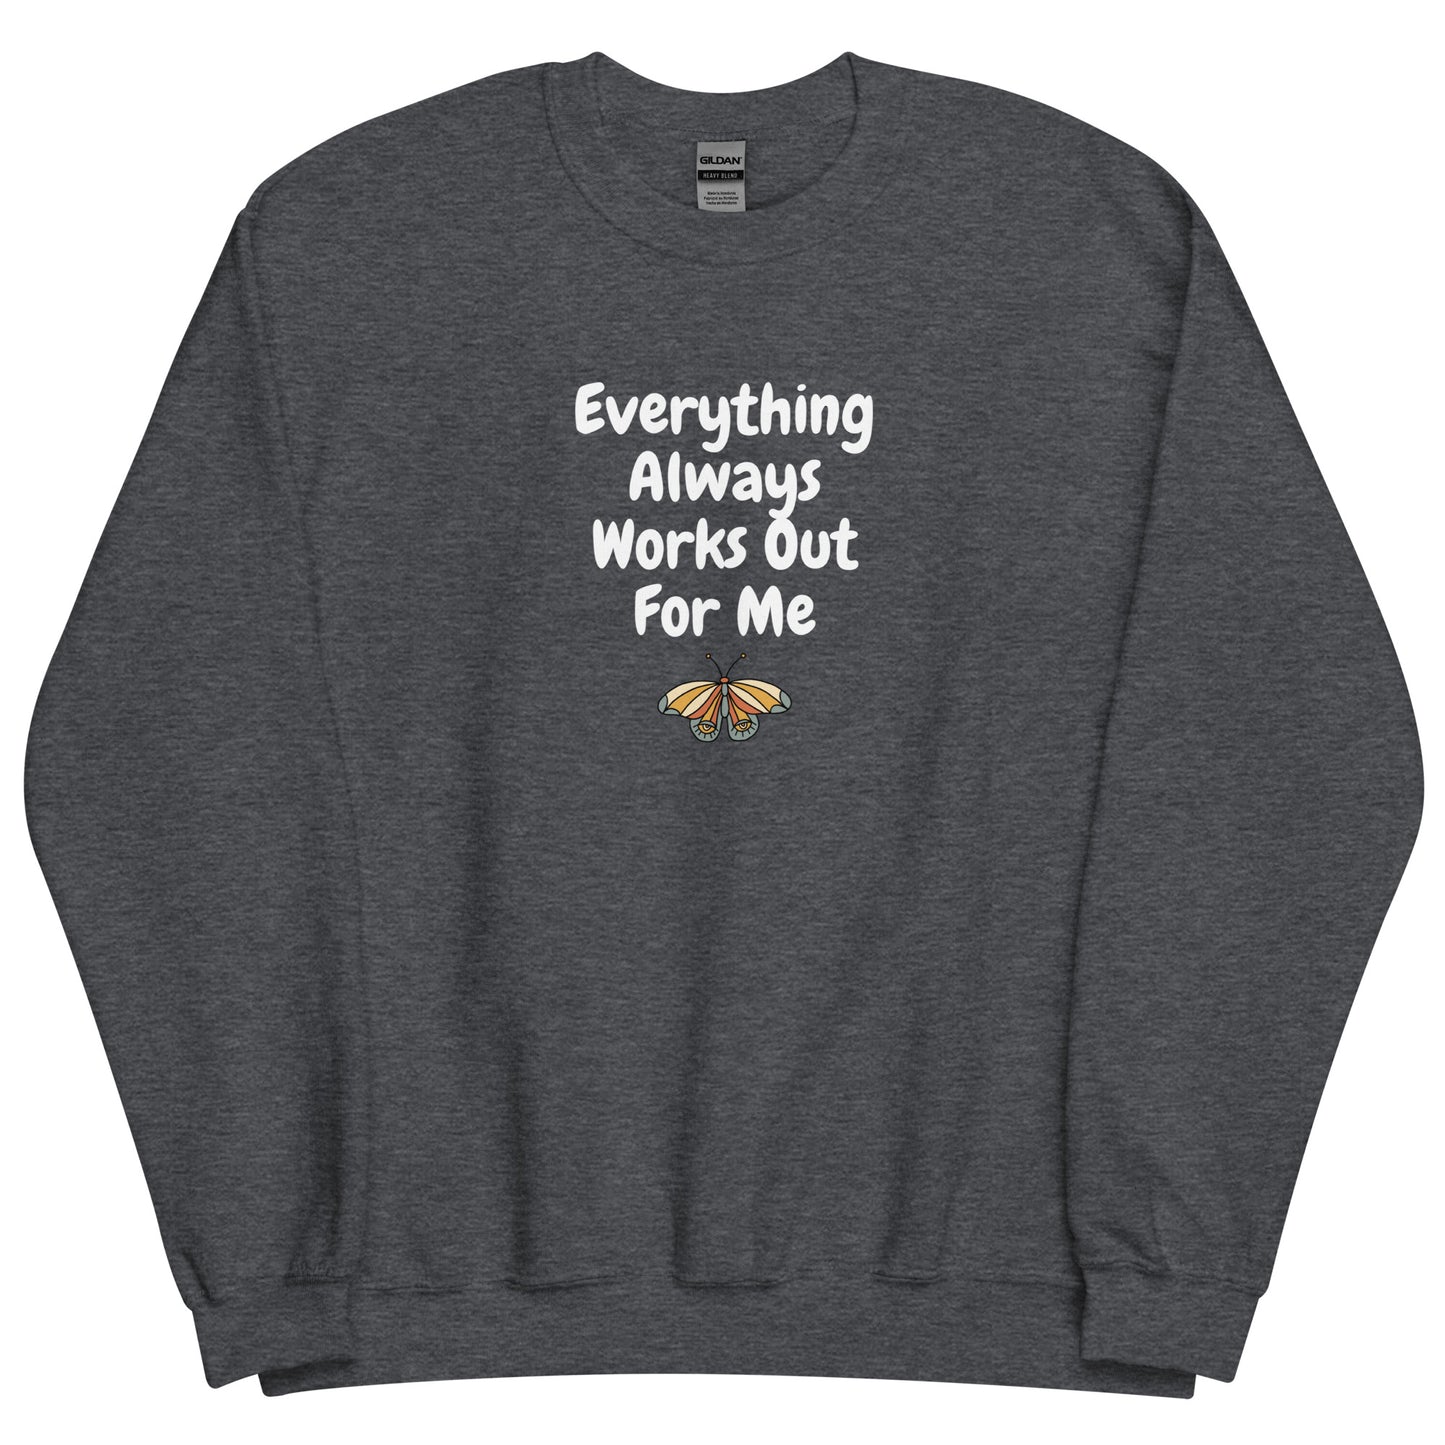 Everything Always Works Out For Me Crewneck